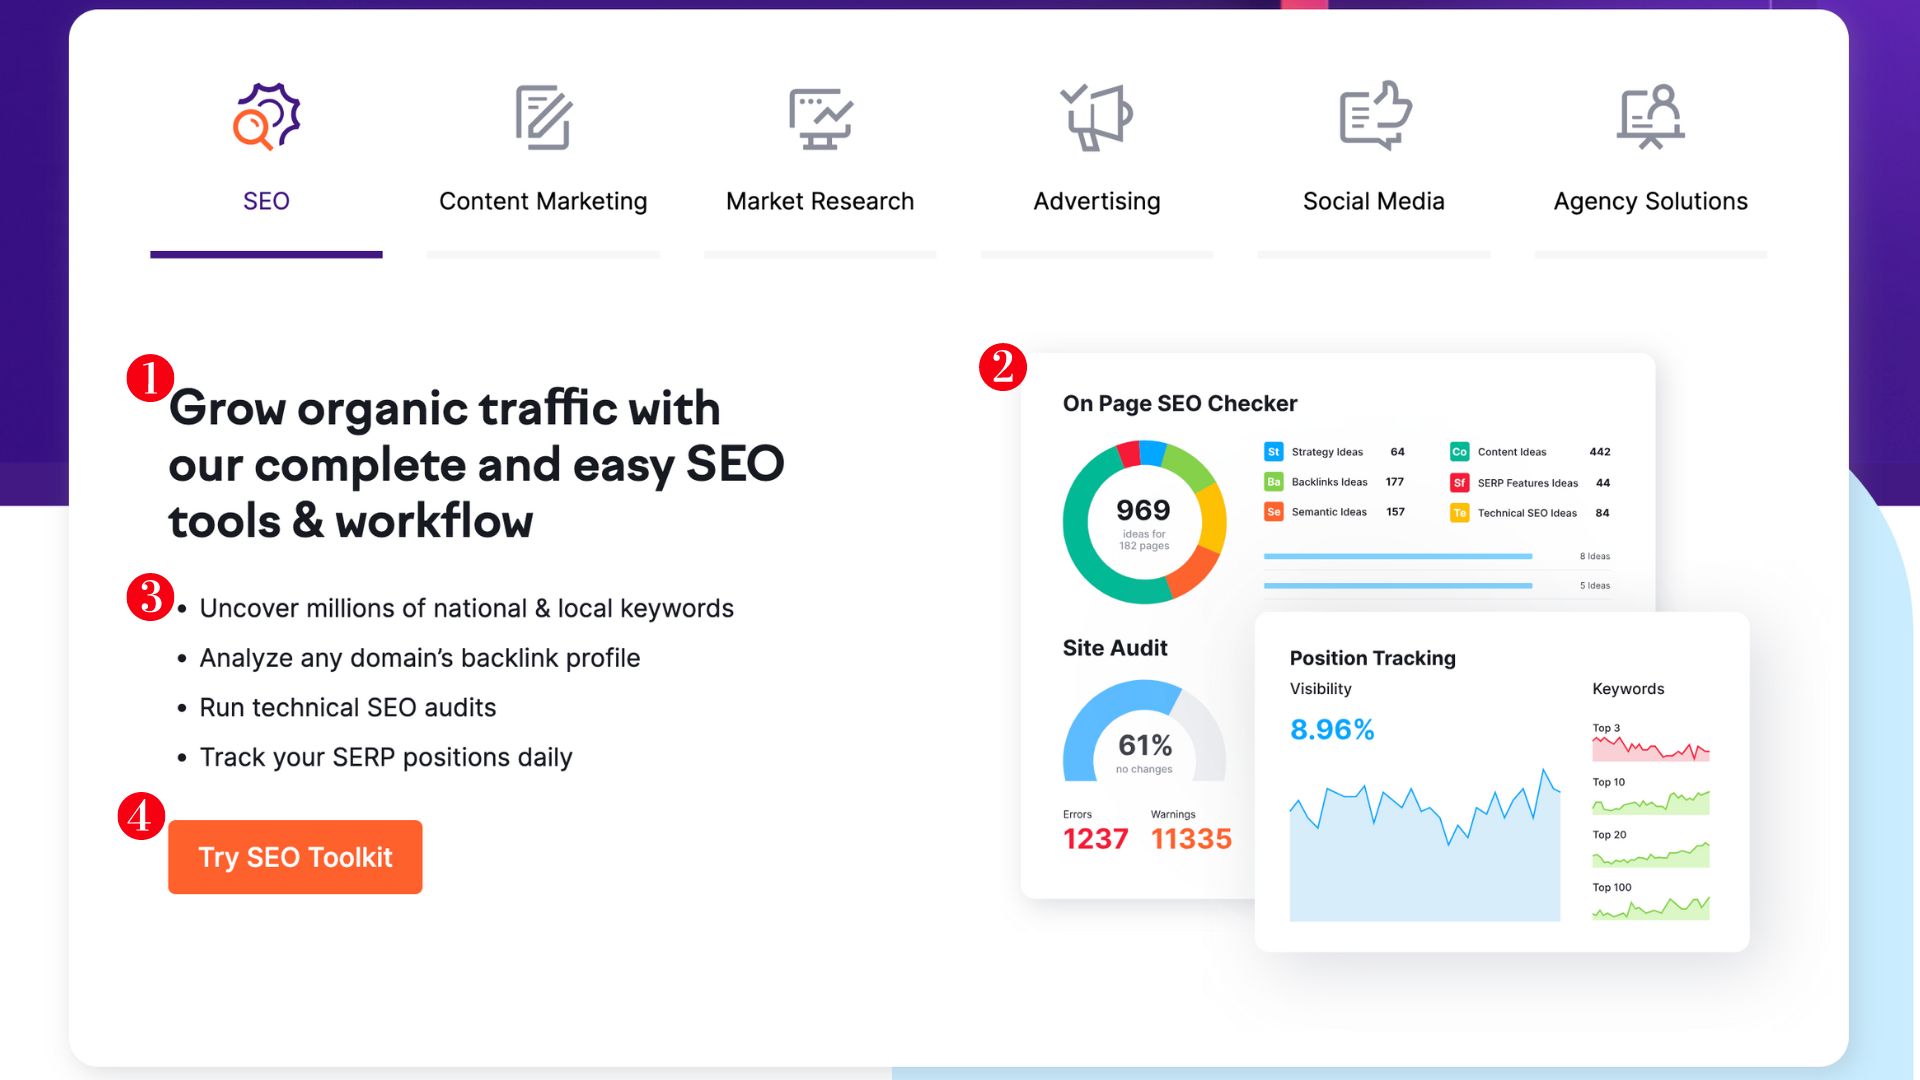 Example of a good landing page: SEMRush.com